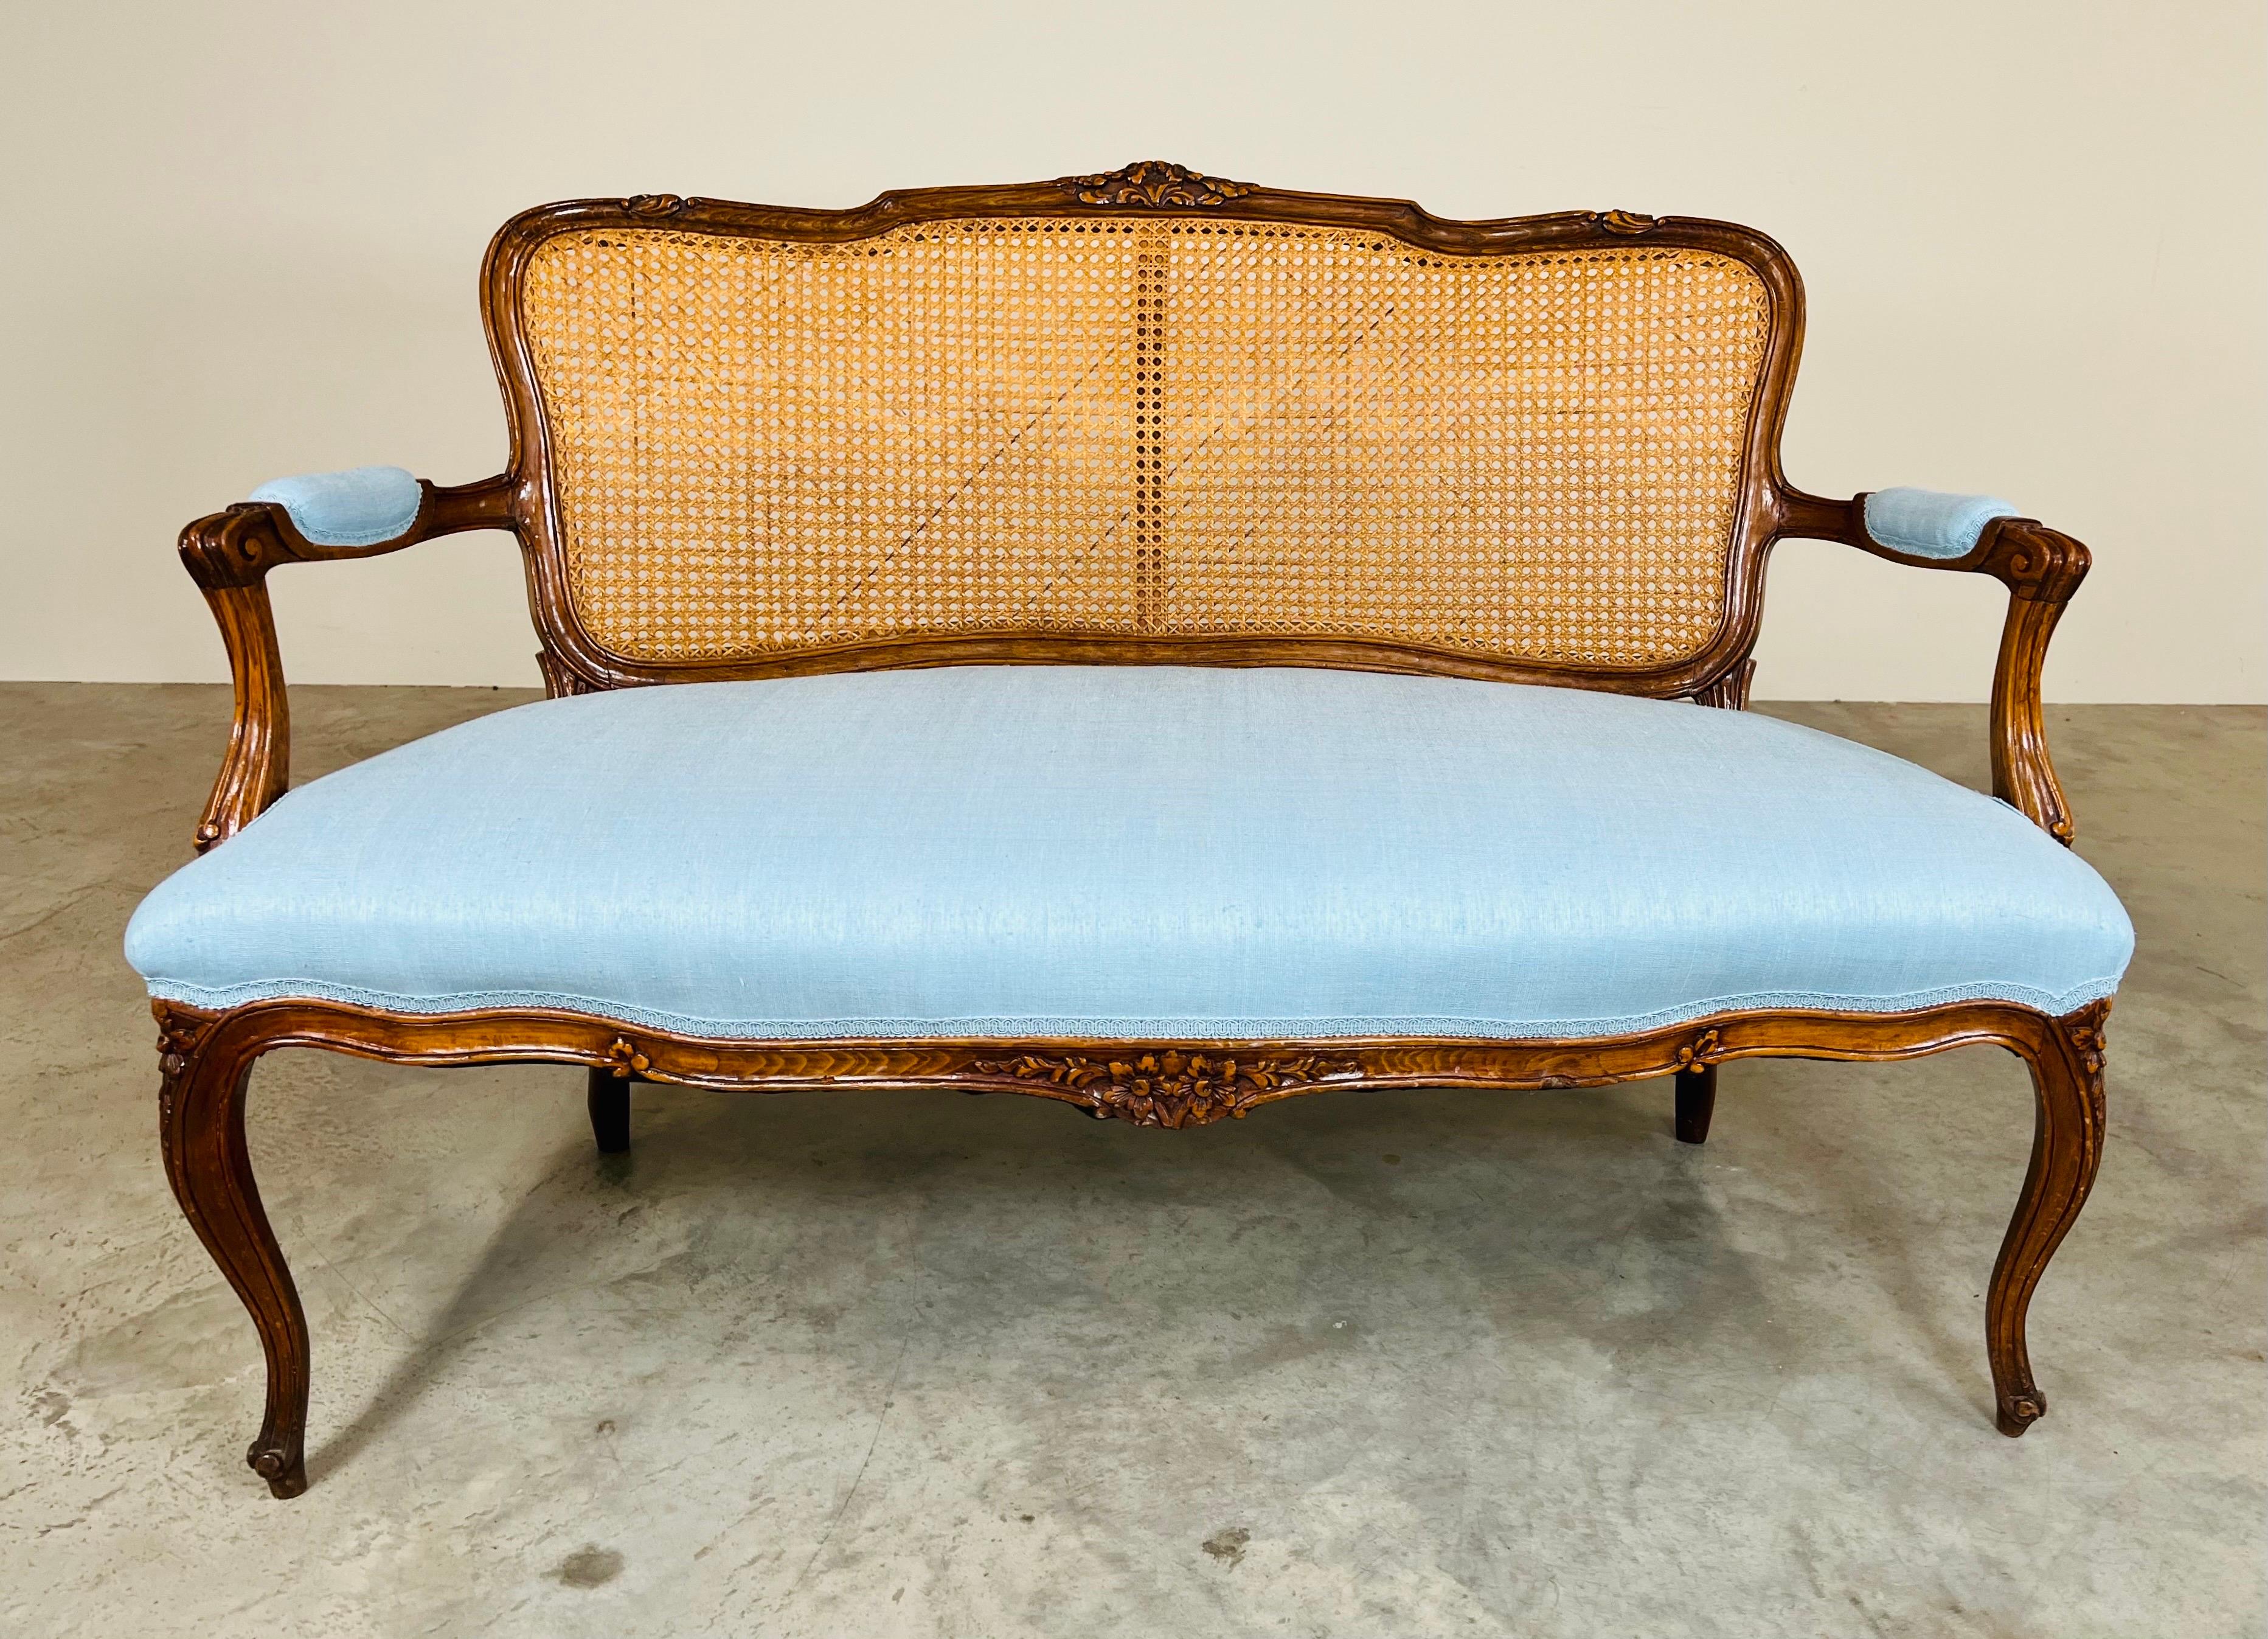 An absolutely beautiful late 19th century settee having hand carved walnut frame with floral and leaf details newly cushioned and upholstered in silk linen new old stock material. France circa 1880. Acquired from the personal collection of a